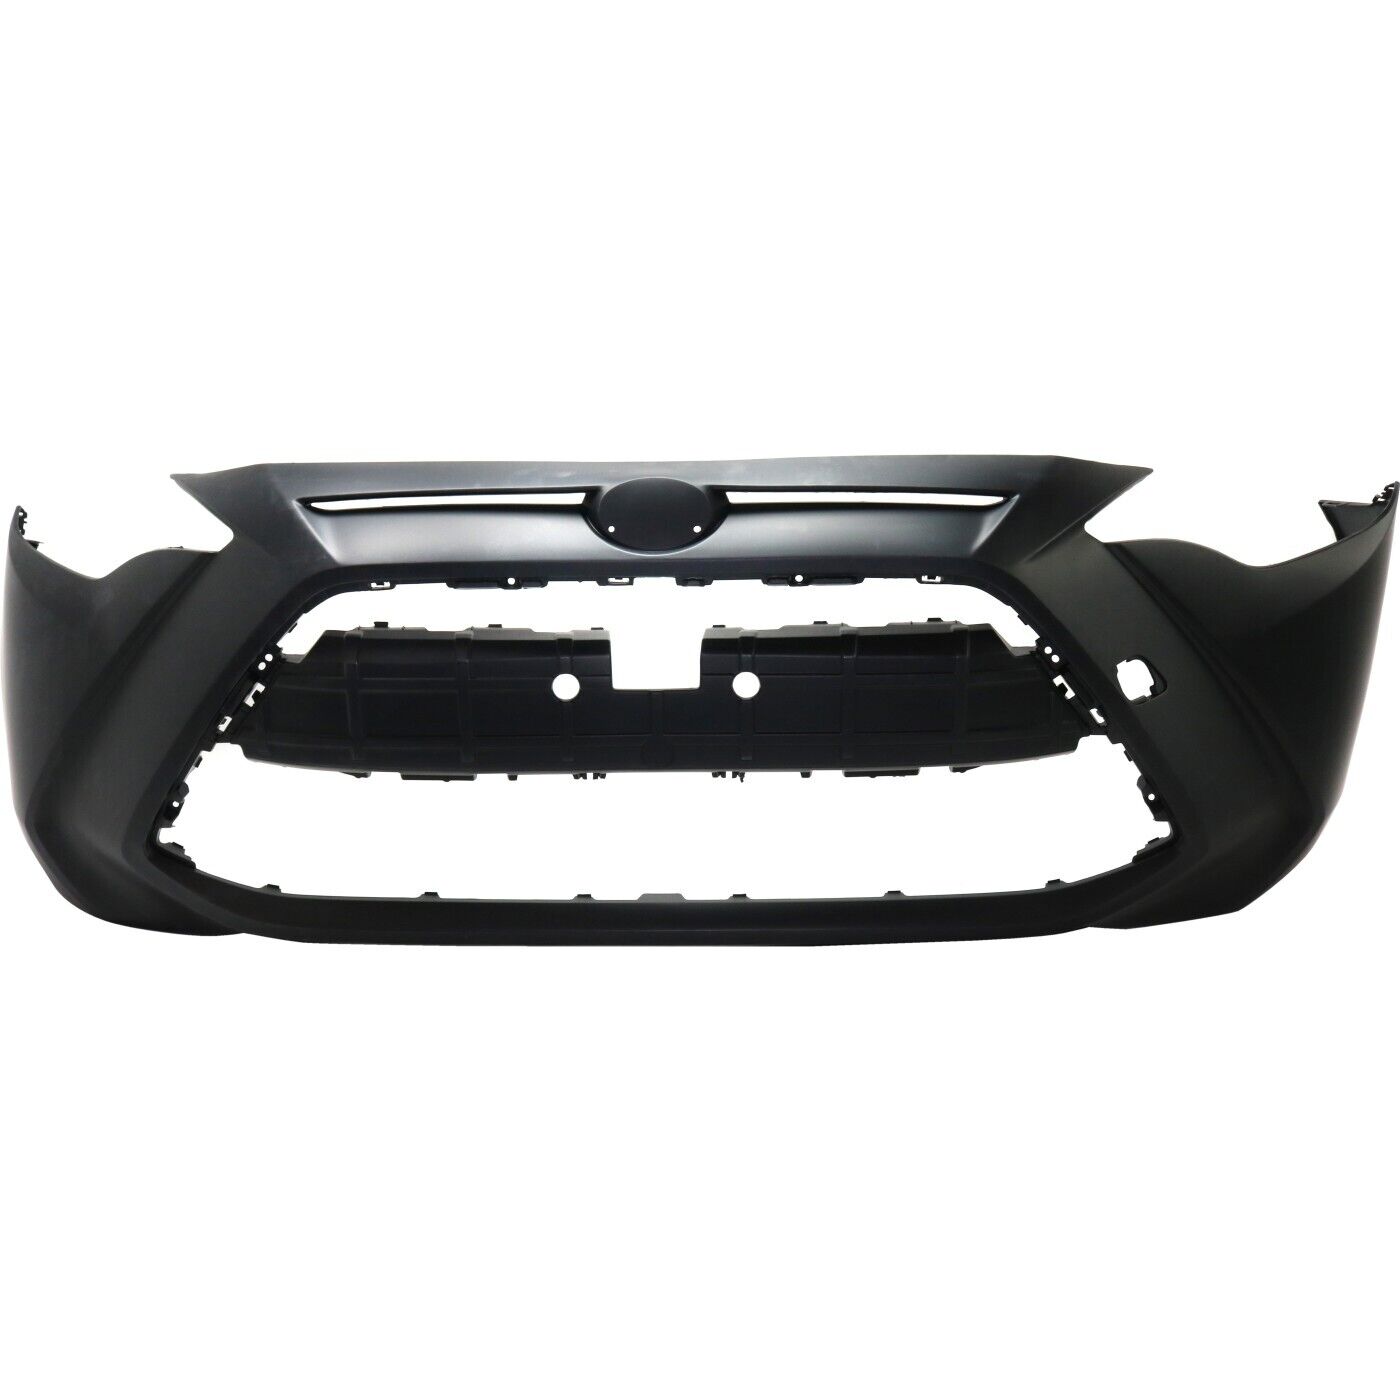 New Bumper Cover Fascia Front for Toyota Yaris Scion iA 16 TO1000416 52119WB005